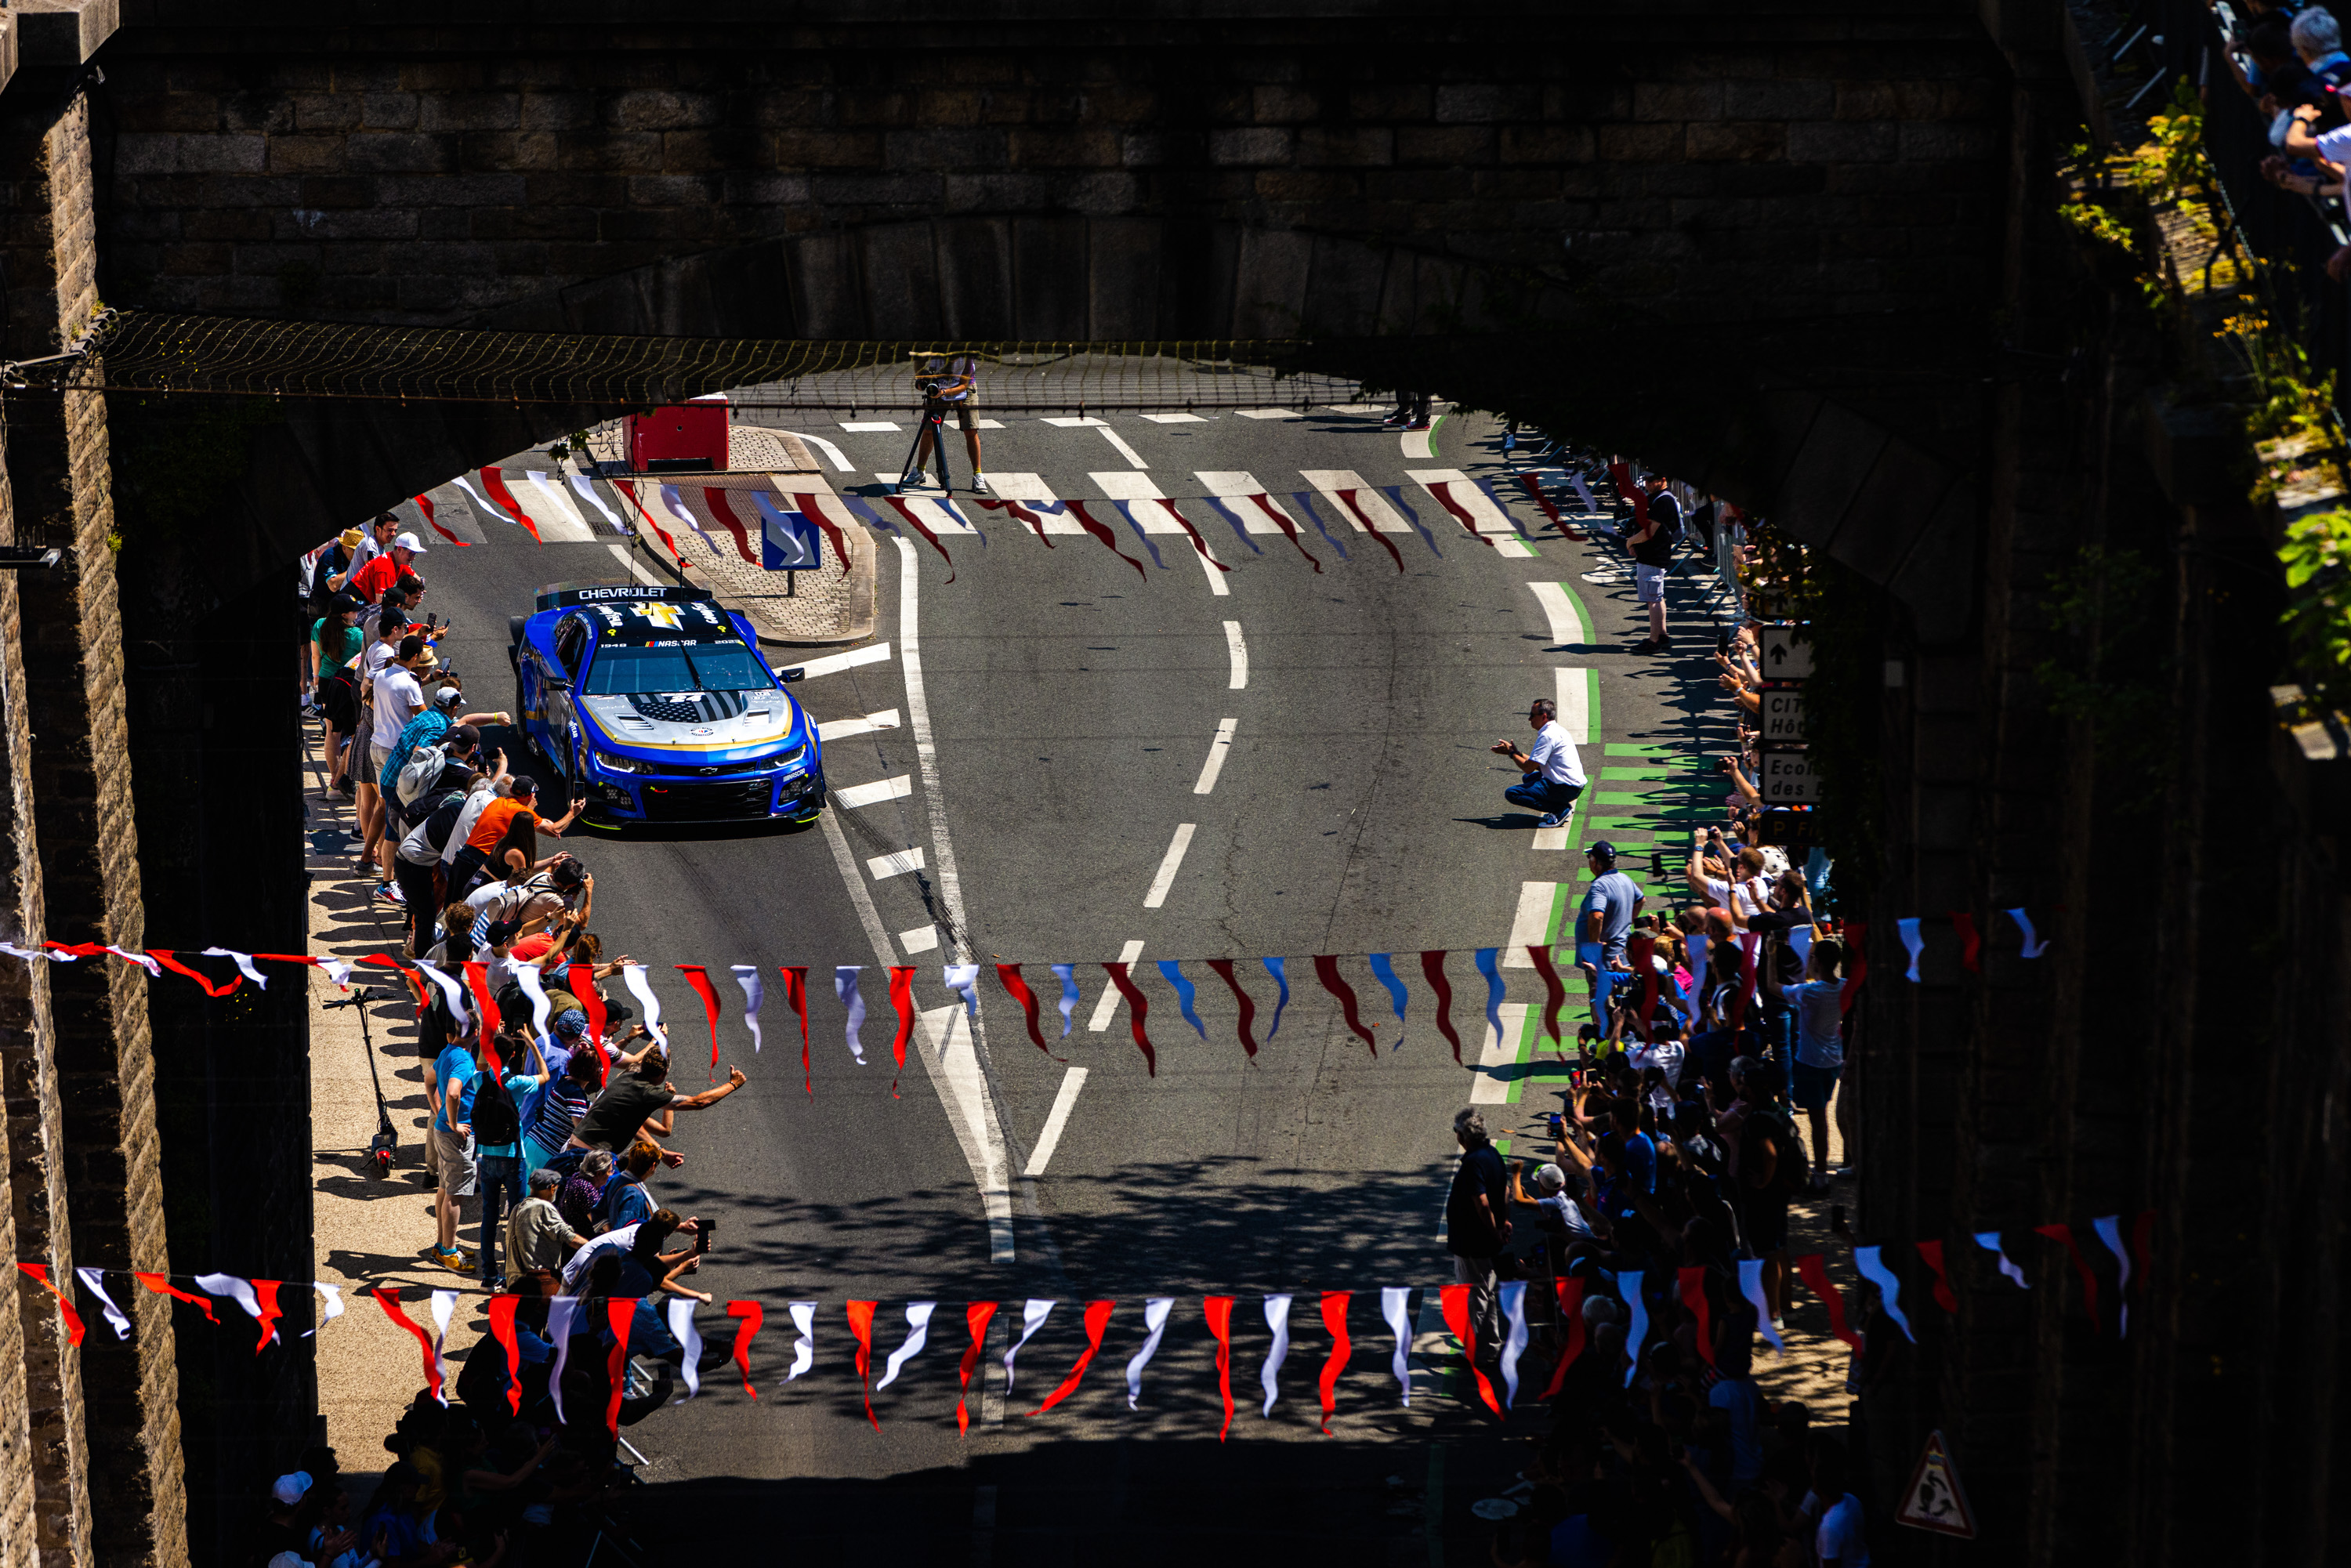 Jimmie Johnson at the wheel of the NASCAR in the streets of Le Mans. What a sight...  and sound!